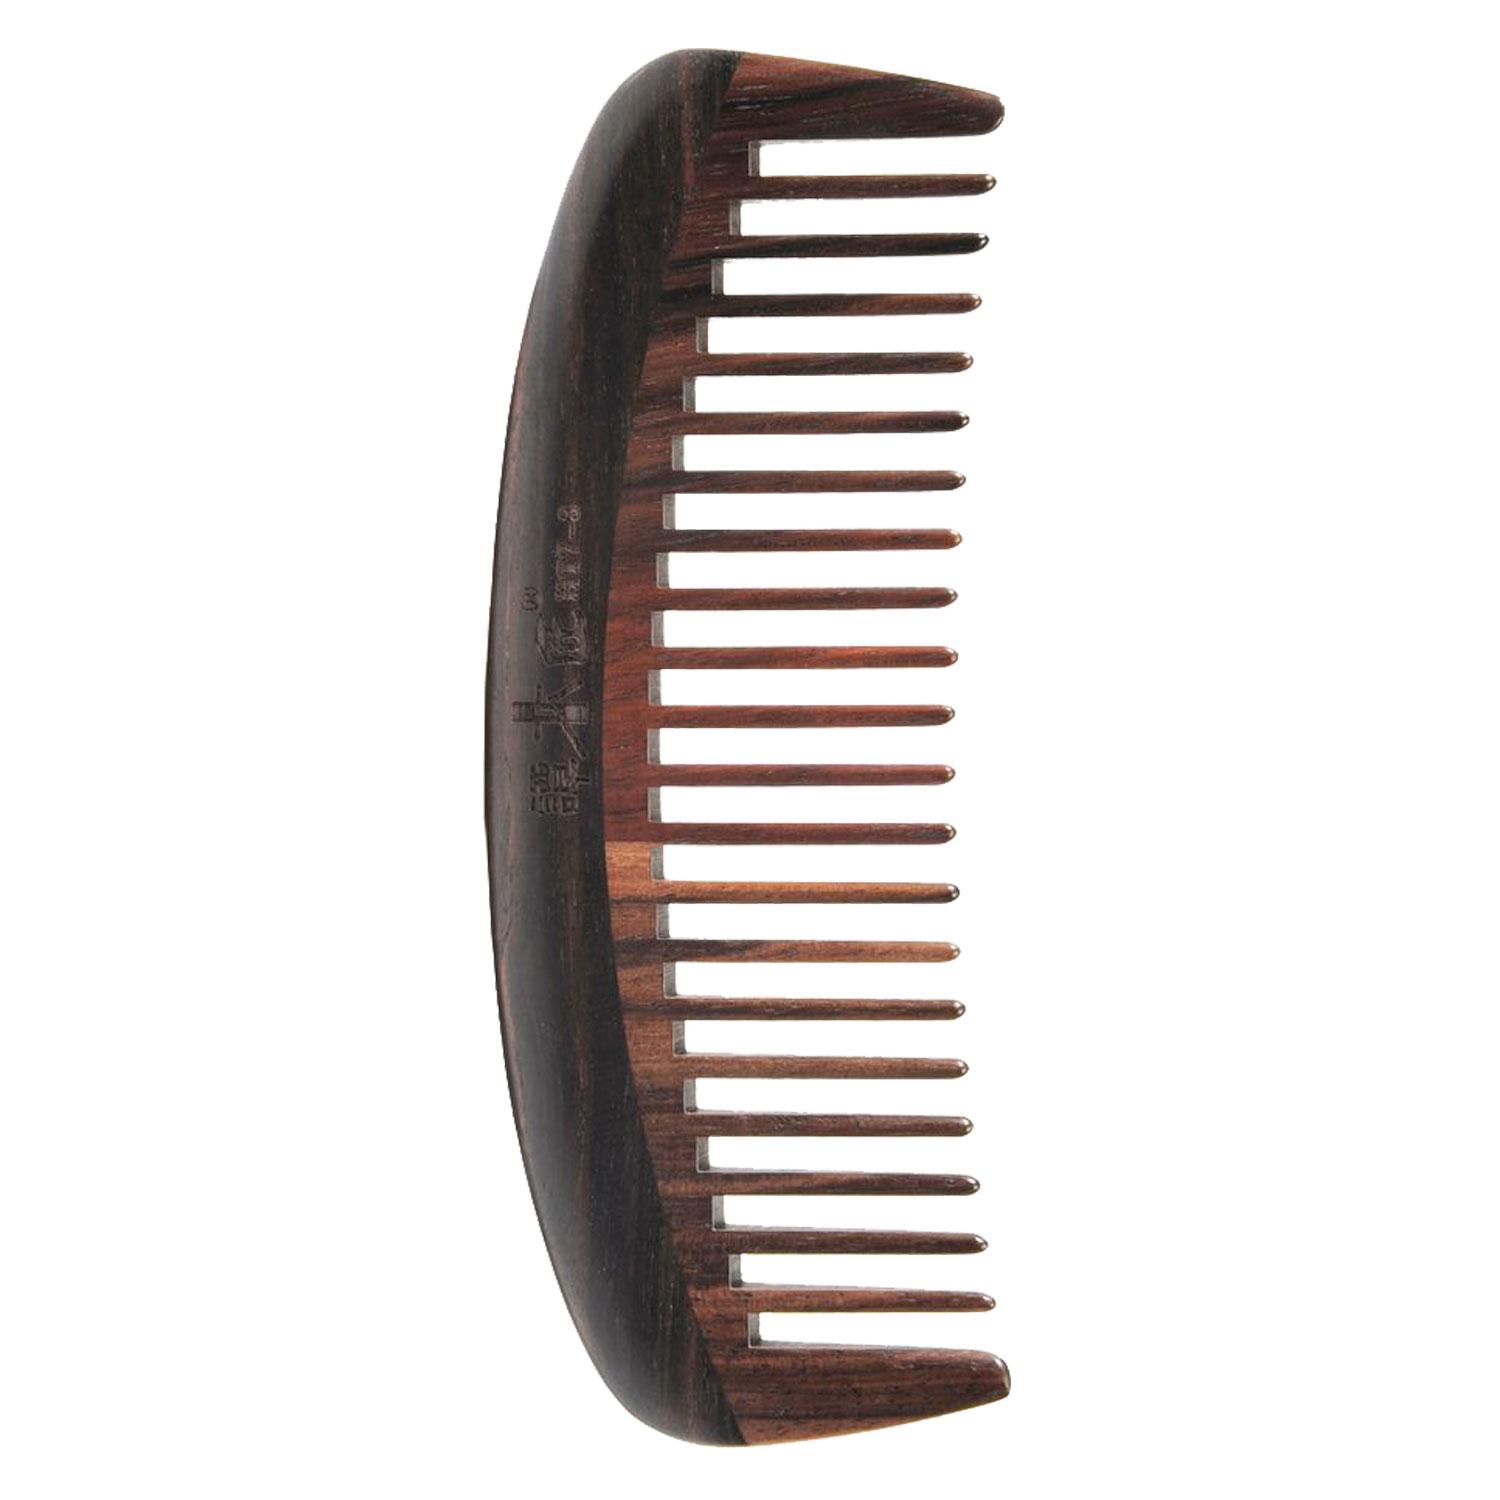 Hair & Care Imperial - Emperor Comb wide